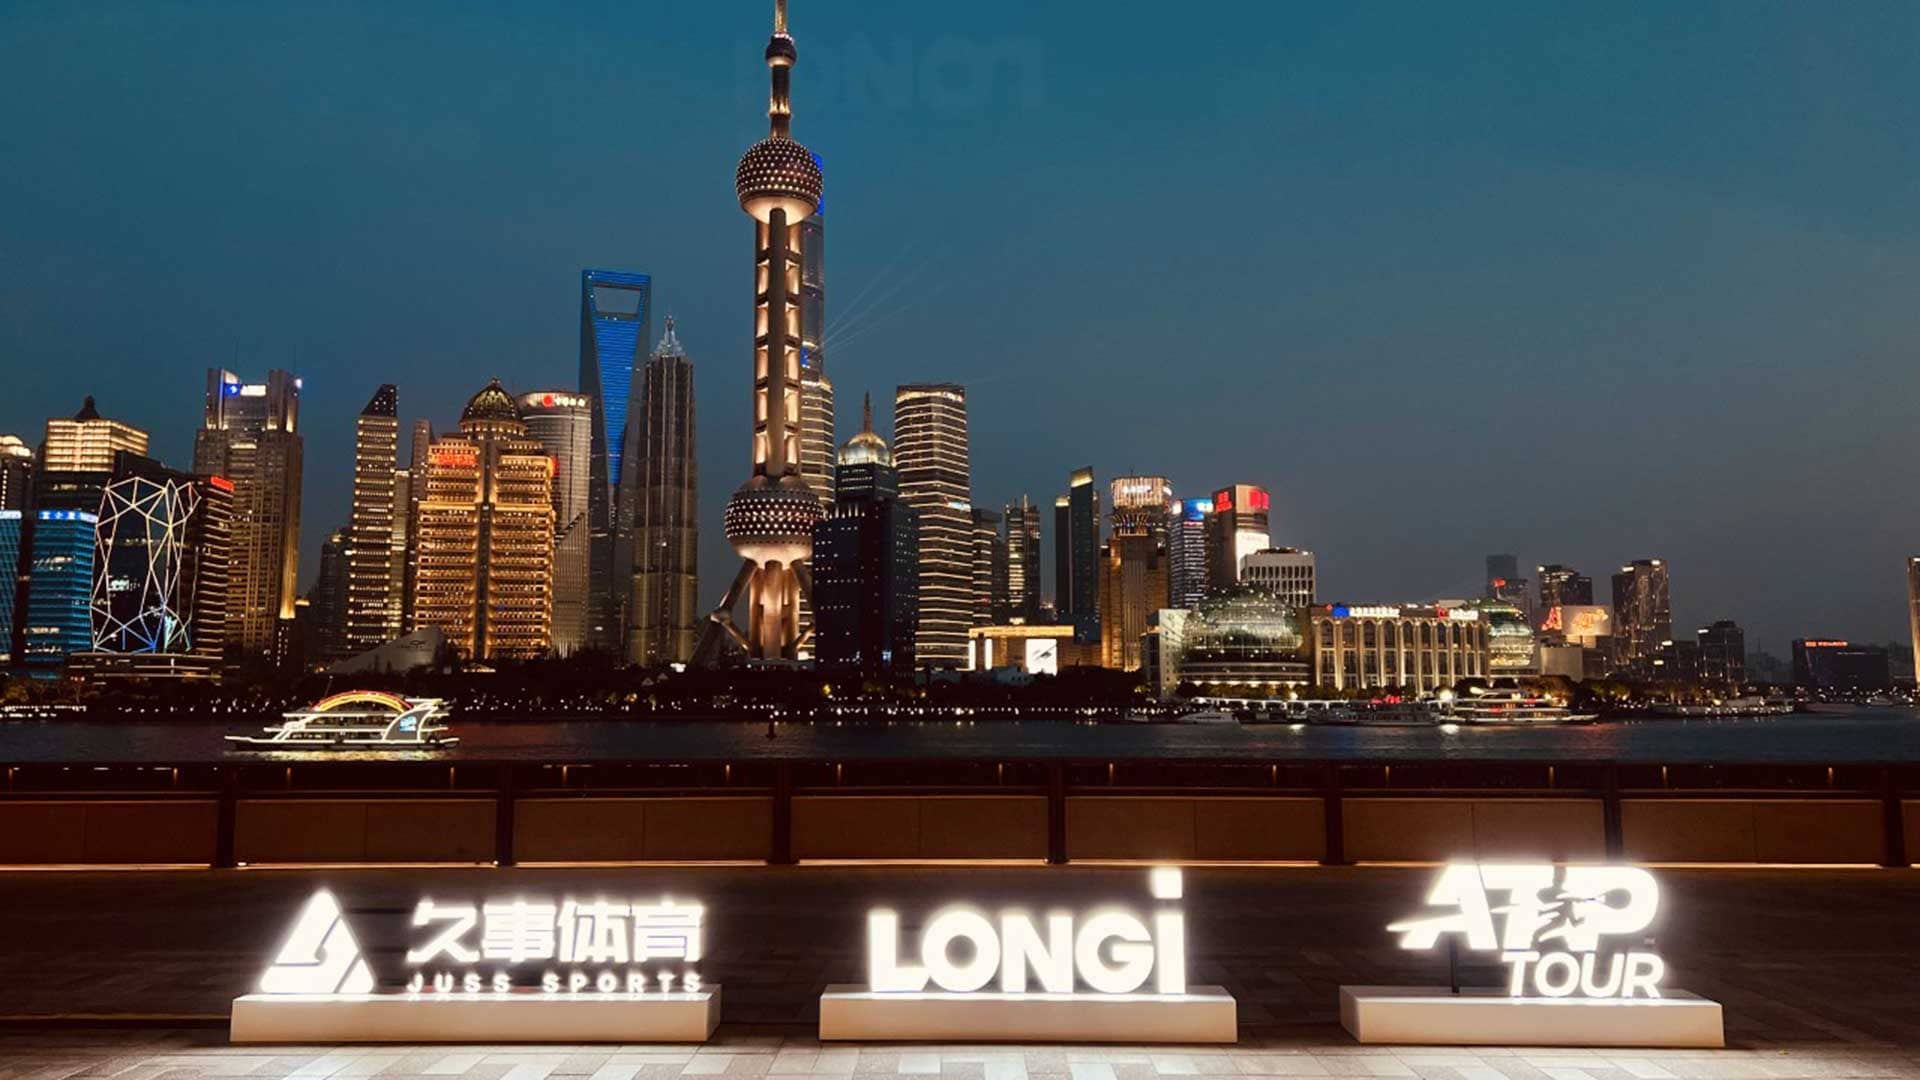 Founded in 2000, LONGi is committed to becoming the world's leading solar energy technology company.